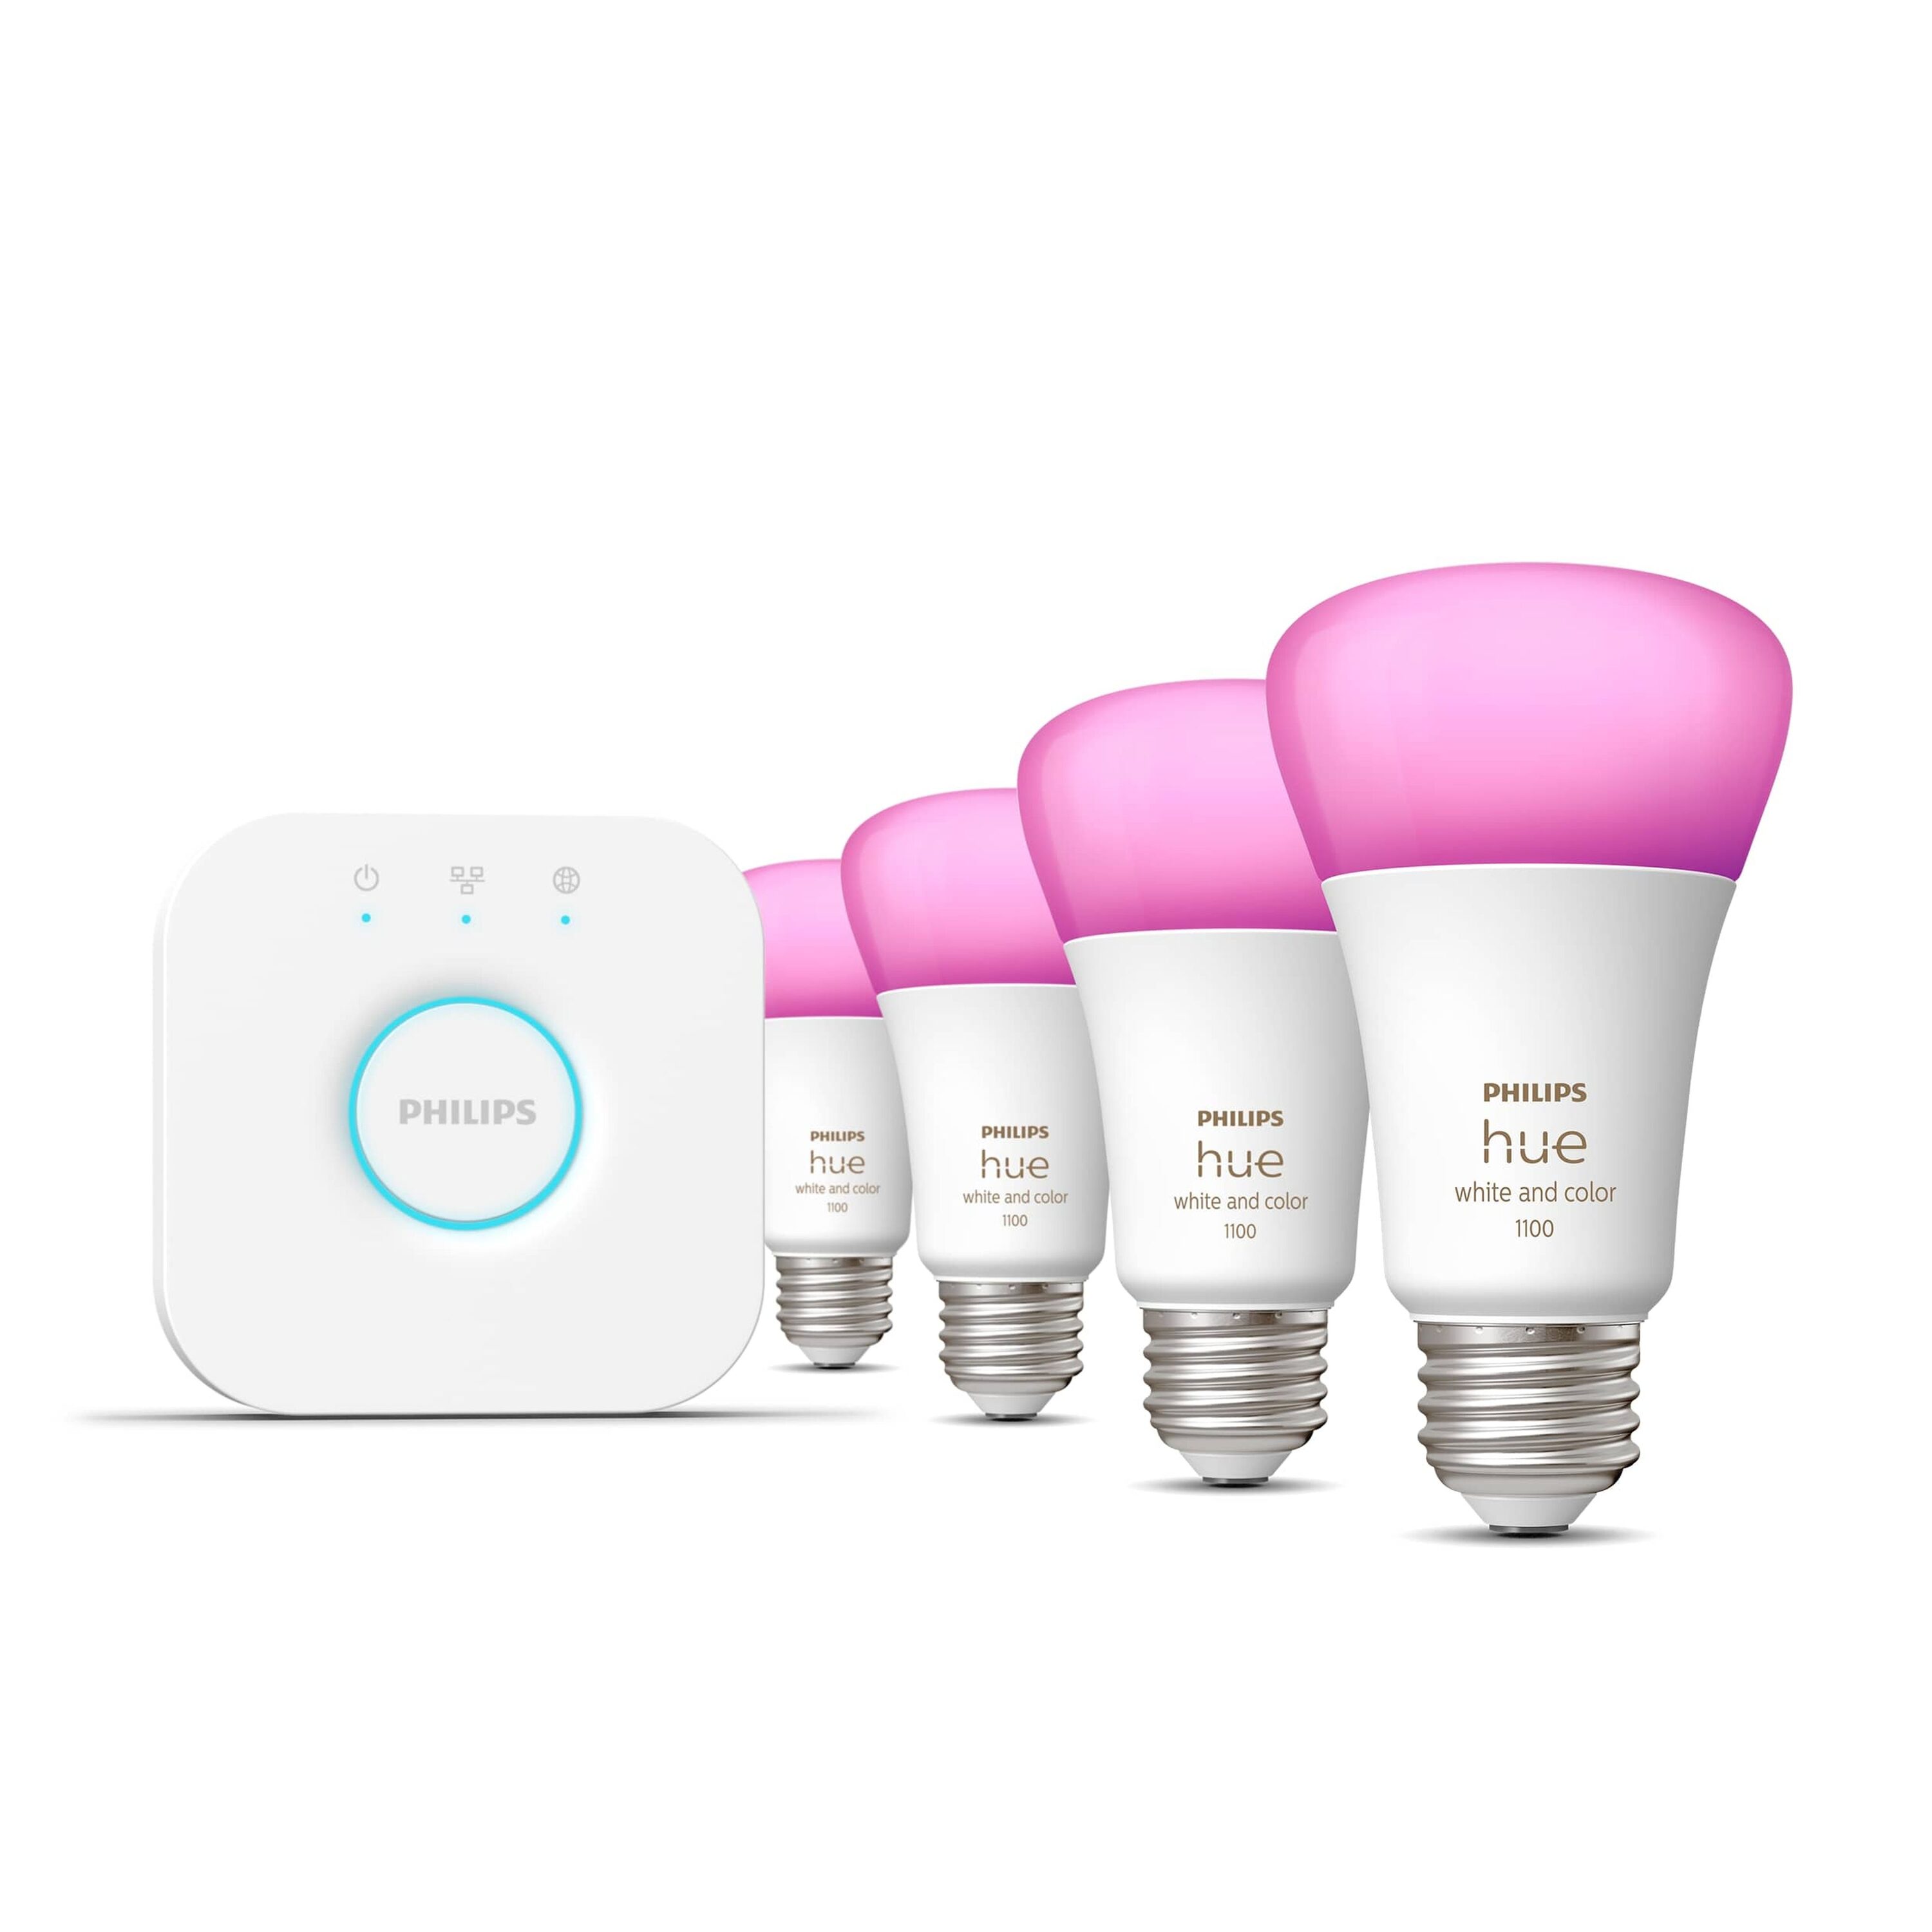 Philips Hue starter kits make for a worthy, but expensive entry